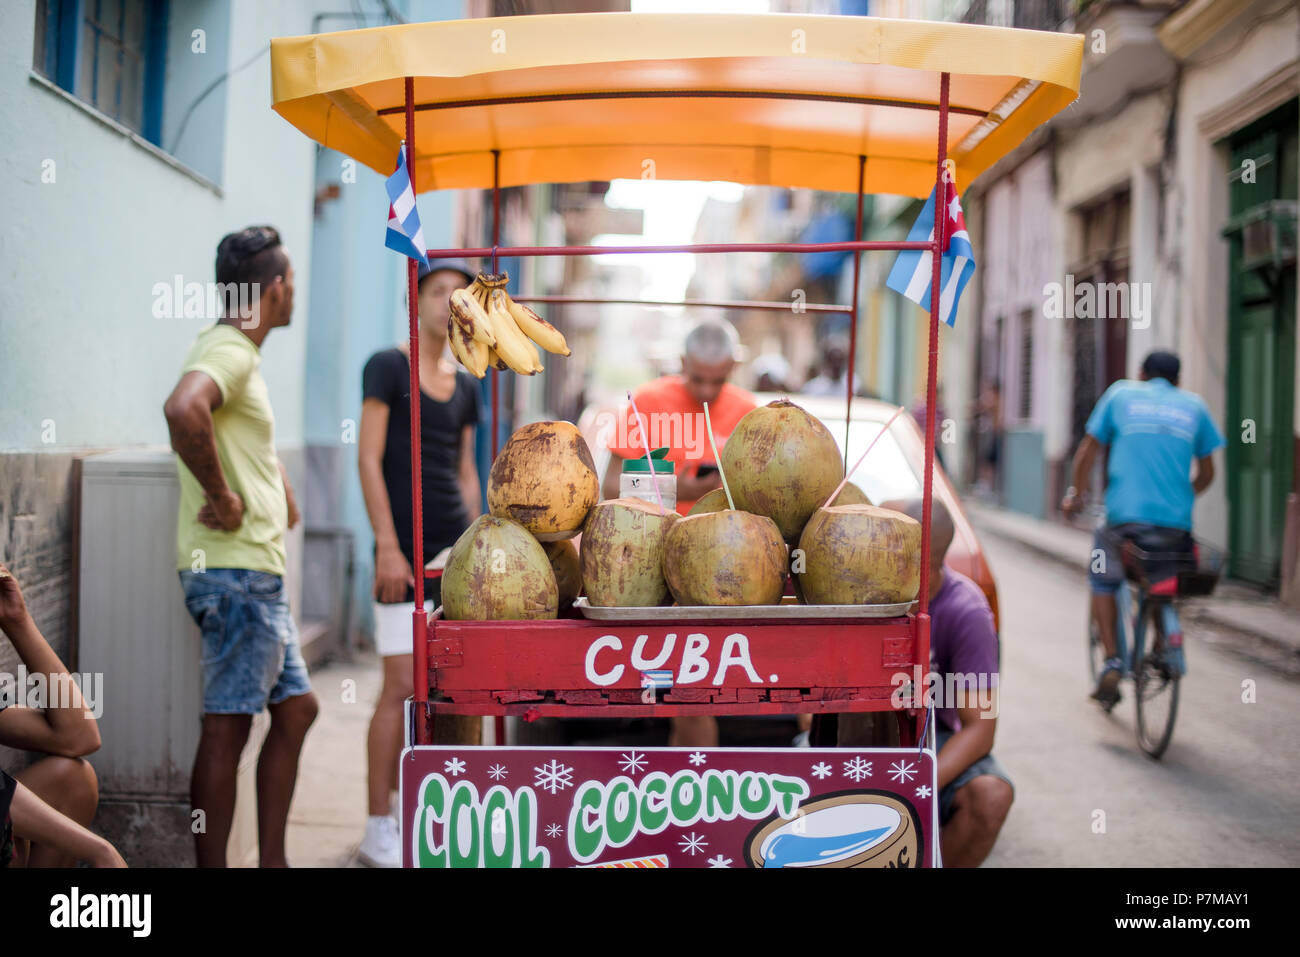 A cart selling coconut water on a hot day in Havana, Cuba Stock Photo